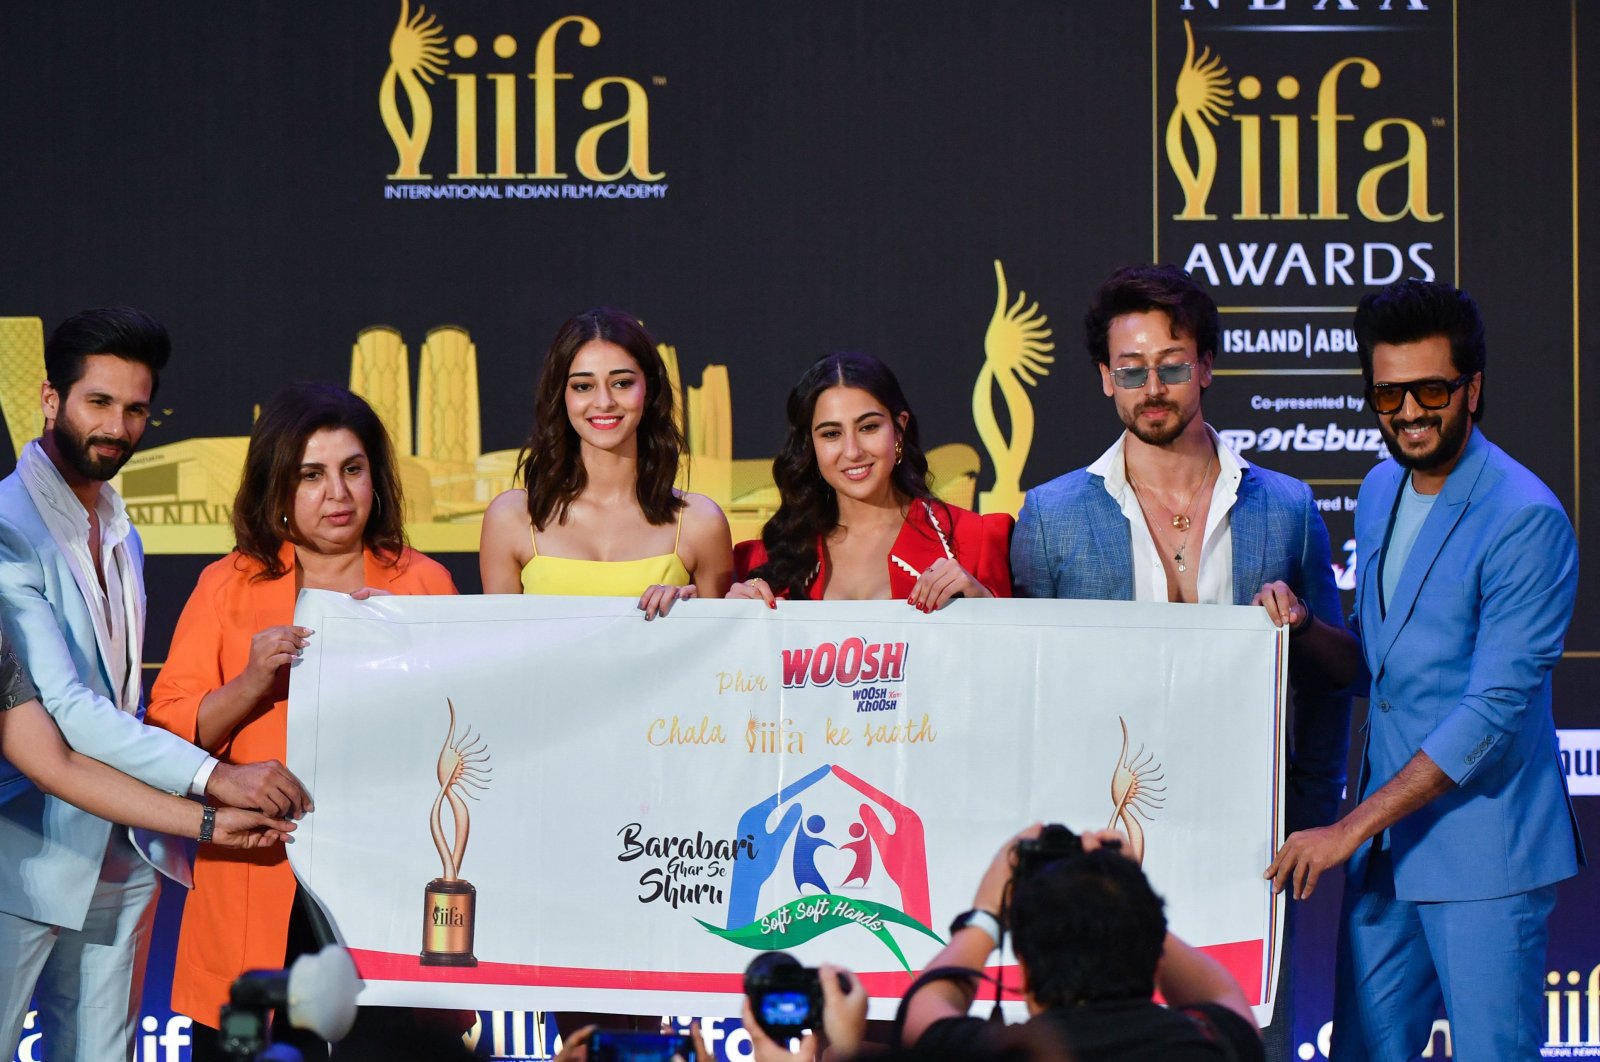 From left to right, Bollywood actor Shahid Kapoor, director Farah Khan, actress Ananya Panday, Sara Ali Khan, actors Tiger Shroff and Ritesh Deshmukh attend a press conference ahead of 22nd edition of the International Indian Film Academy Awards in Abu Dhabi, United Arab Emirates, June 2, 2022. (AFP Photo)